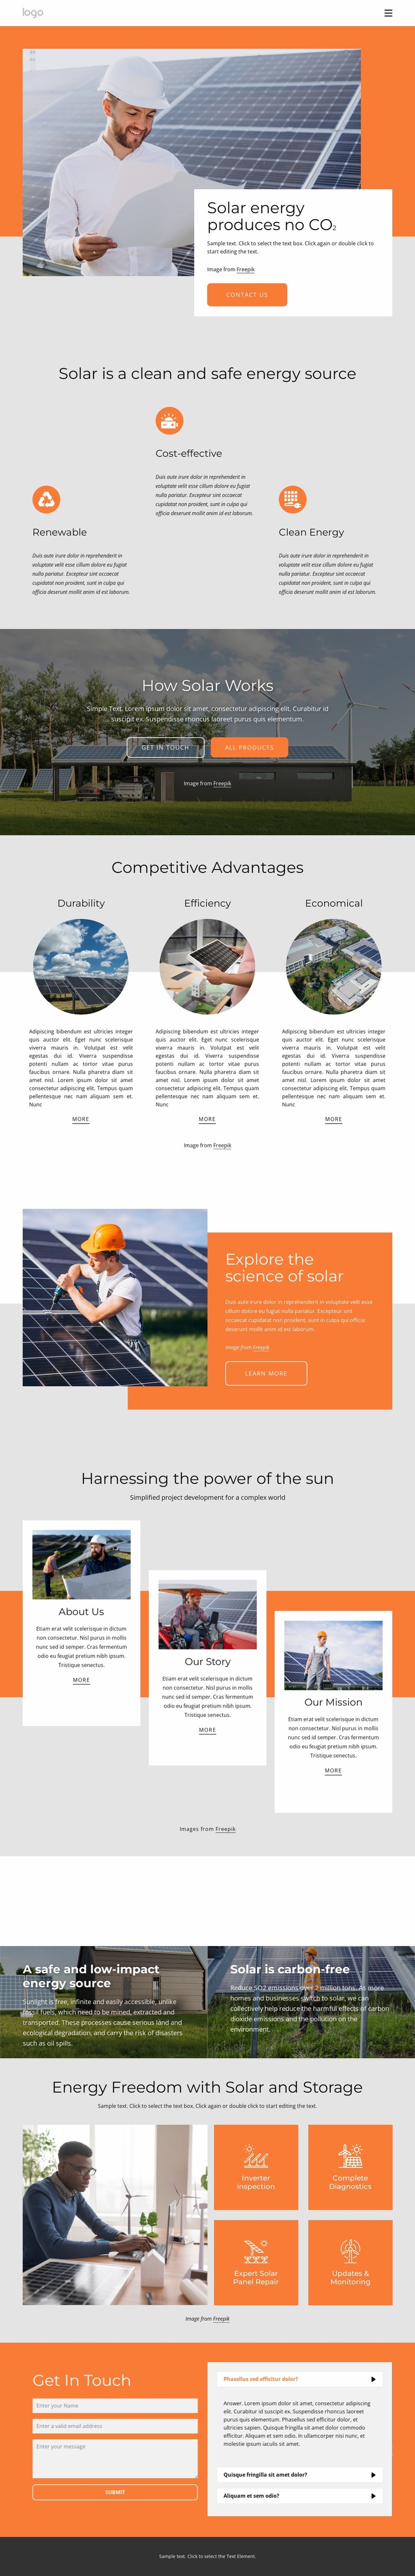 Power your home with clean solar energy Html Website Builder